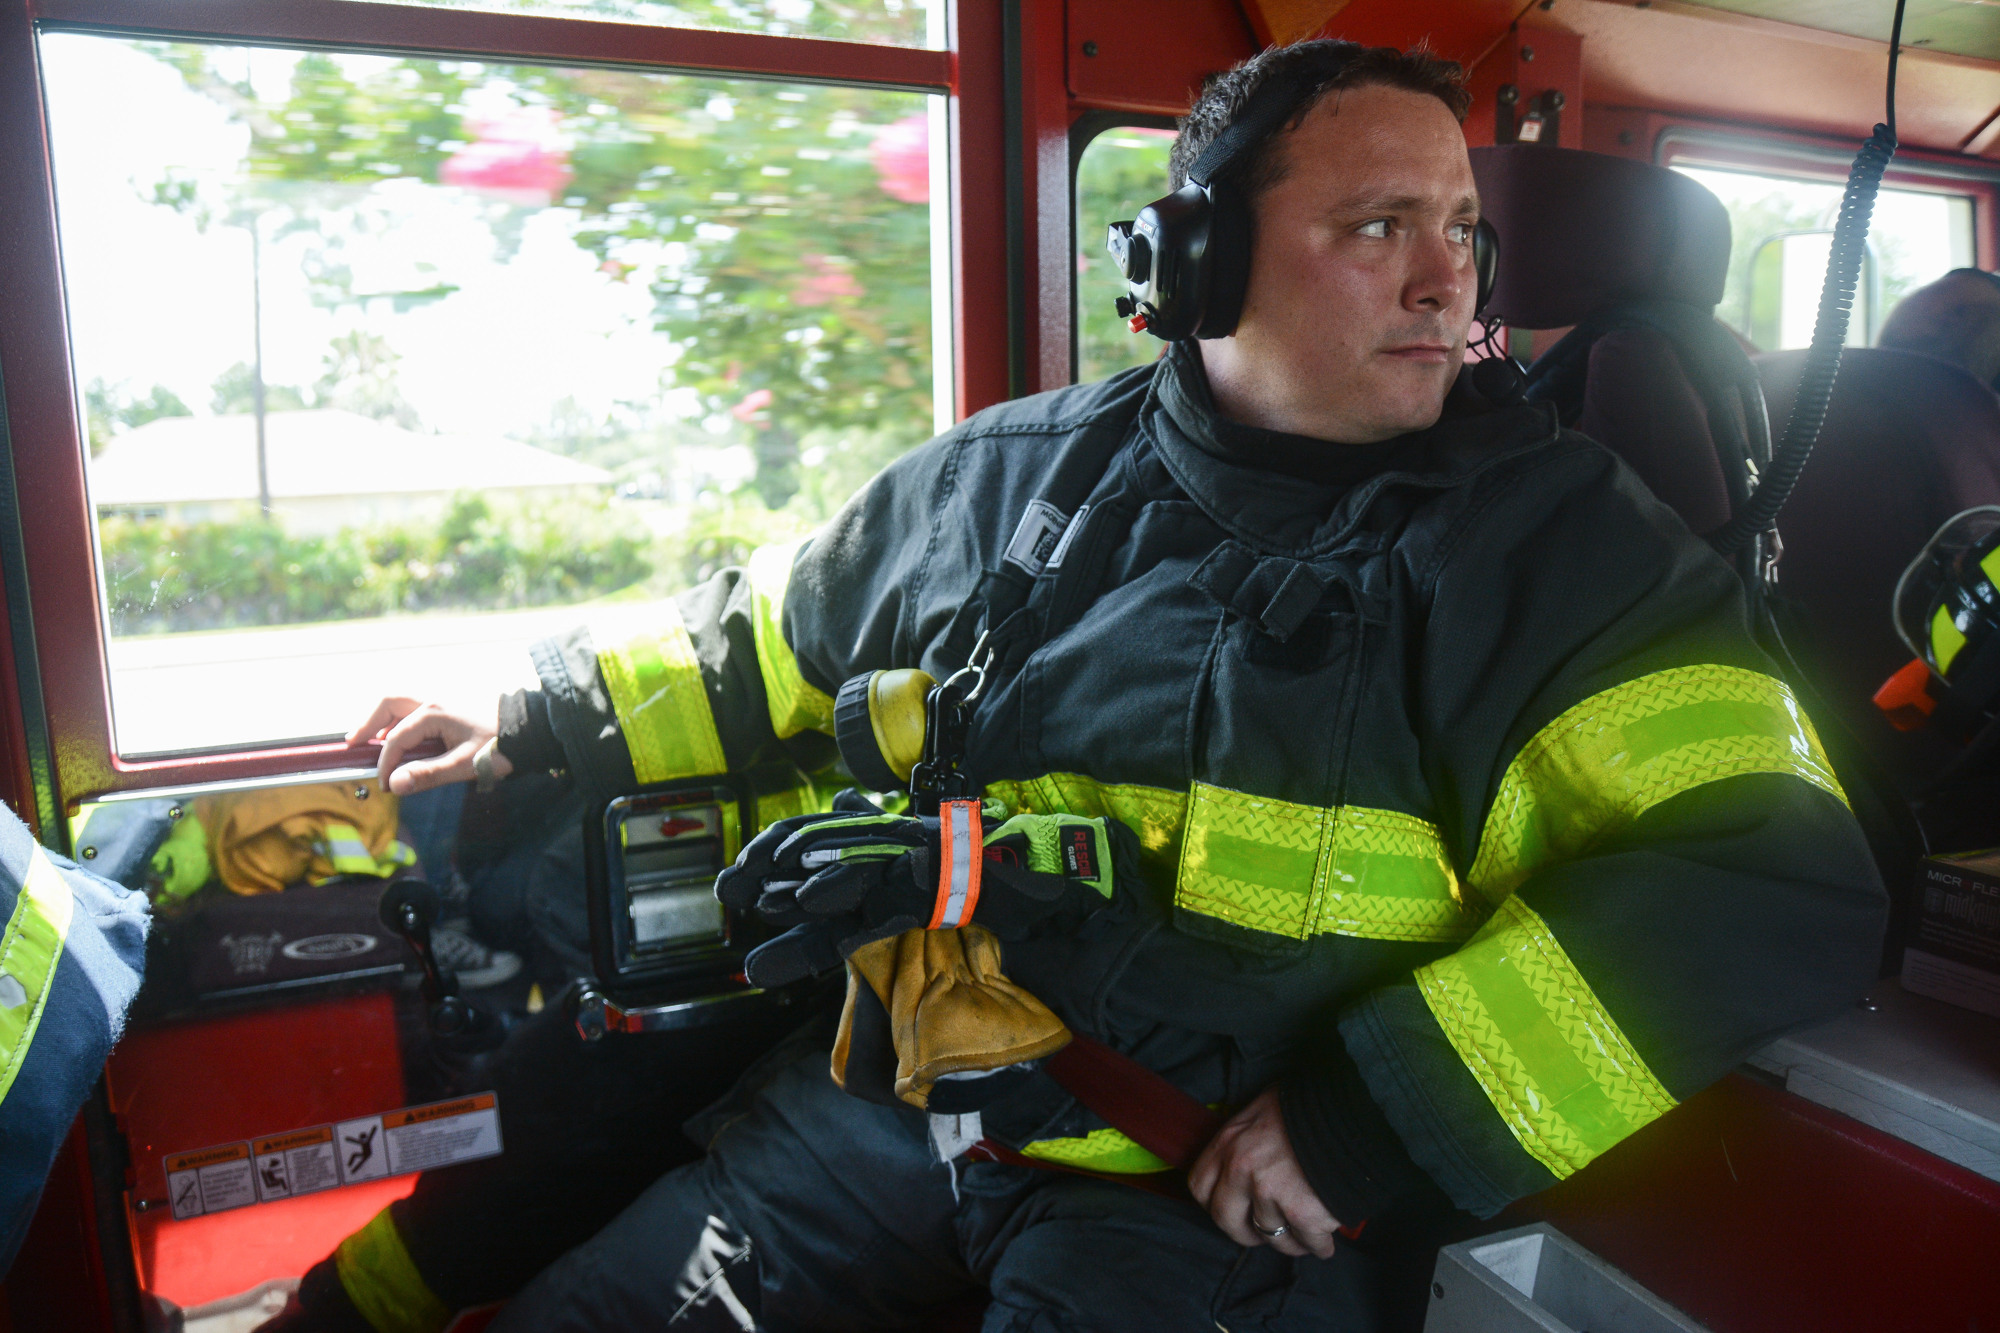 Firefighter-EMT Chris Strozier sits in the back seat of Fire Engine 23 on the way to a call. Photo by Paige Wilson